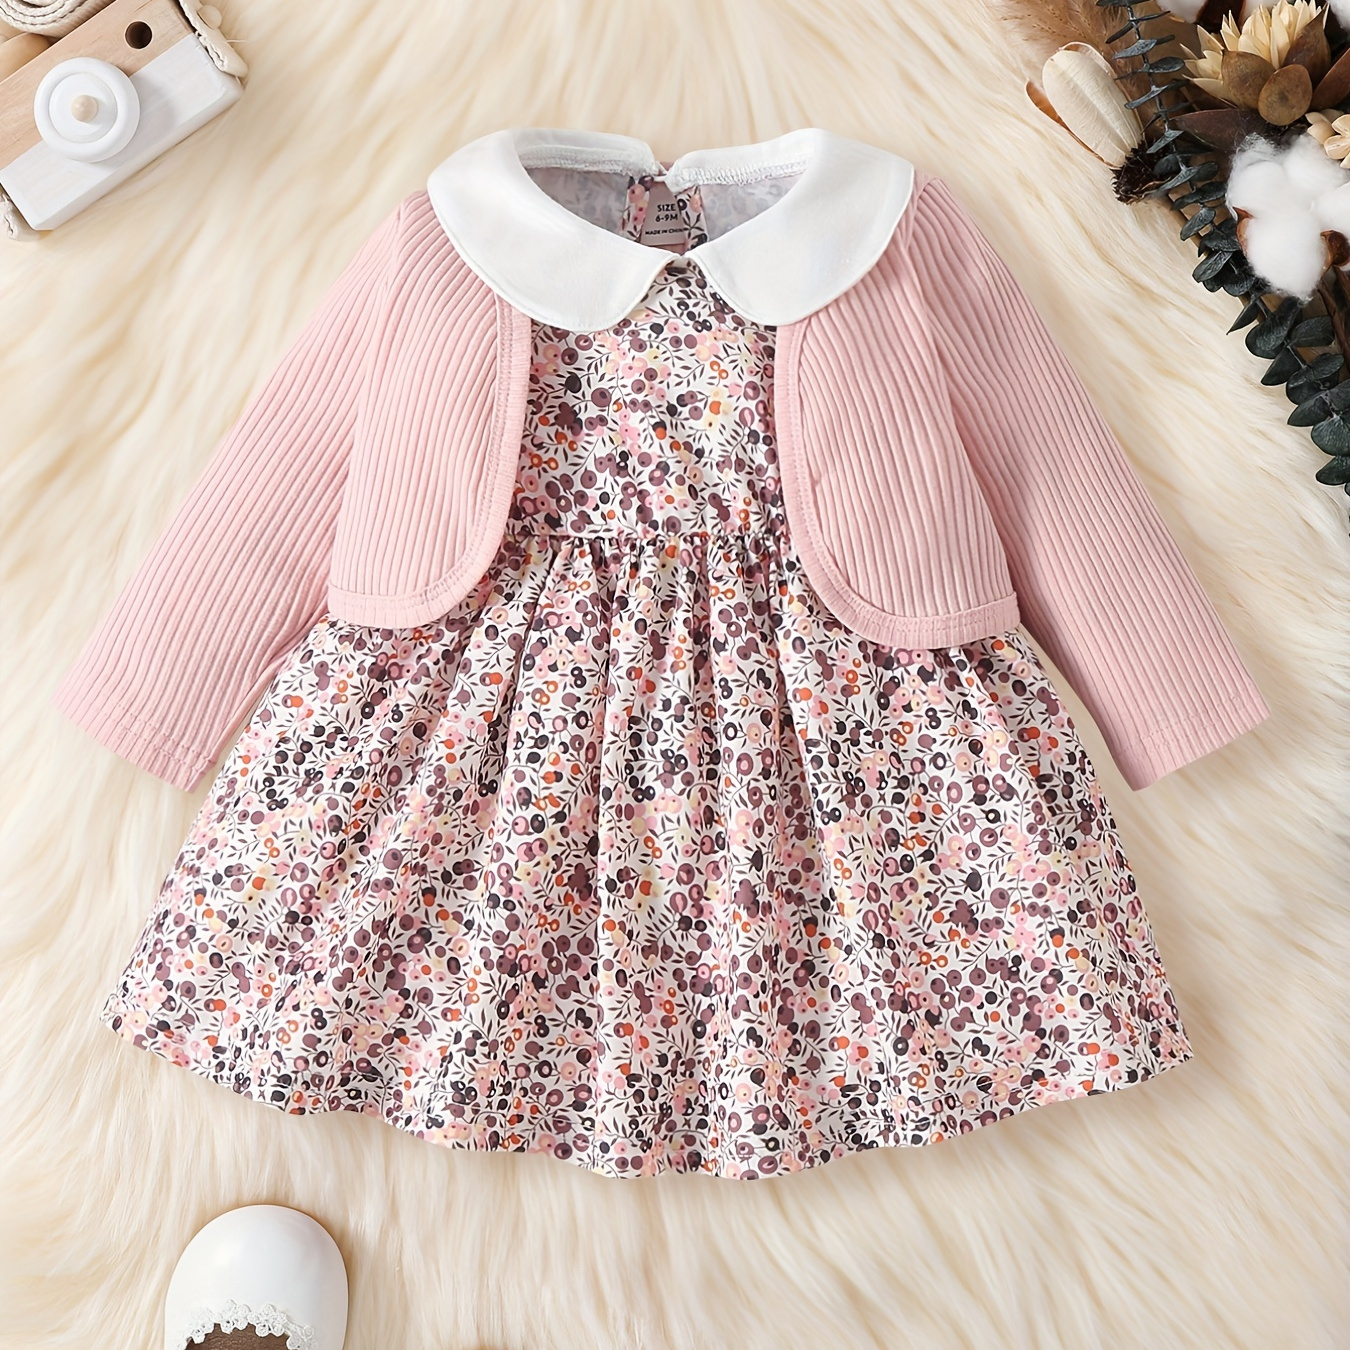 

Baby Girls Sweet Outfits, Toddler's Autumn Long Sleeve Cardigan Top + Ditsy Print Long Sleeve Splicing Dress Set